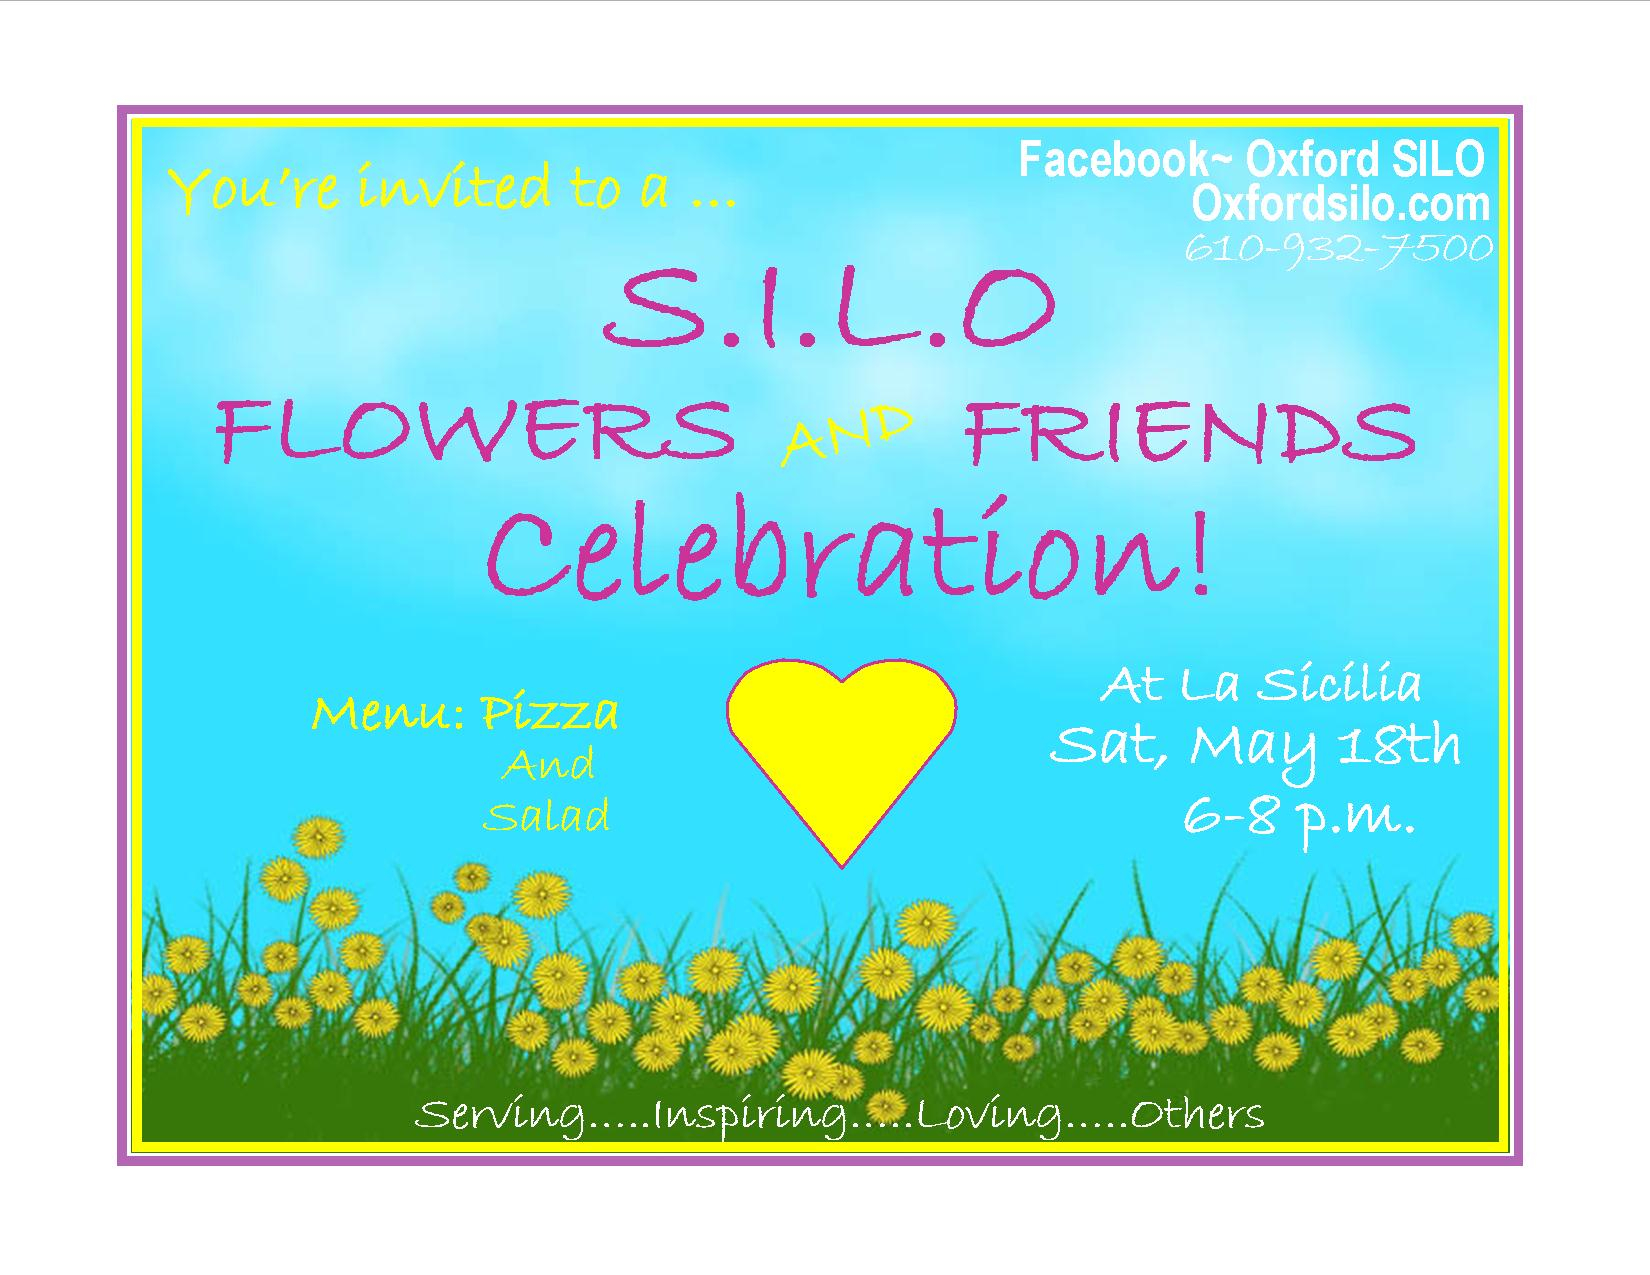 Flowers & Friends Meal, May 18th, 6-8pm behind La Sicilia Restaurant